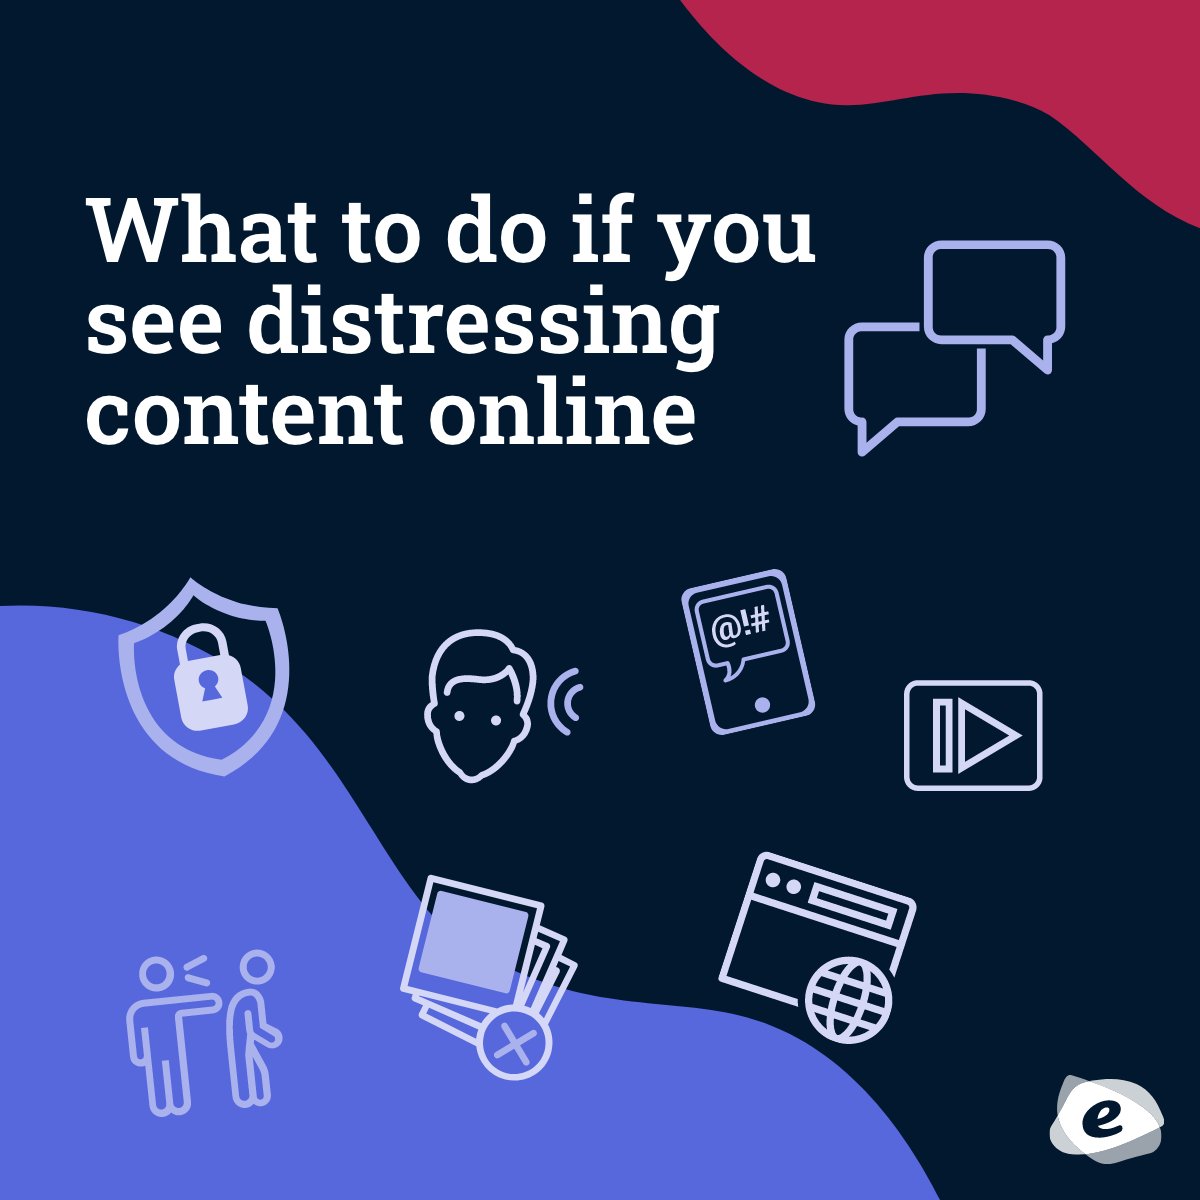 Following the events of the last several days, you may come across online content that is distressing. Here's what to do ⬇